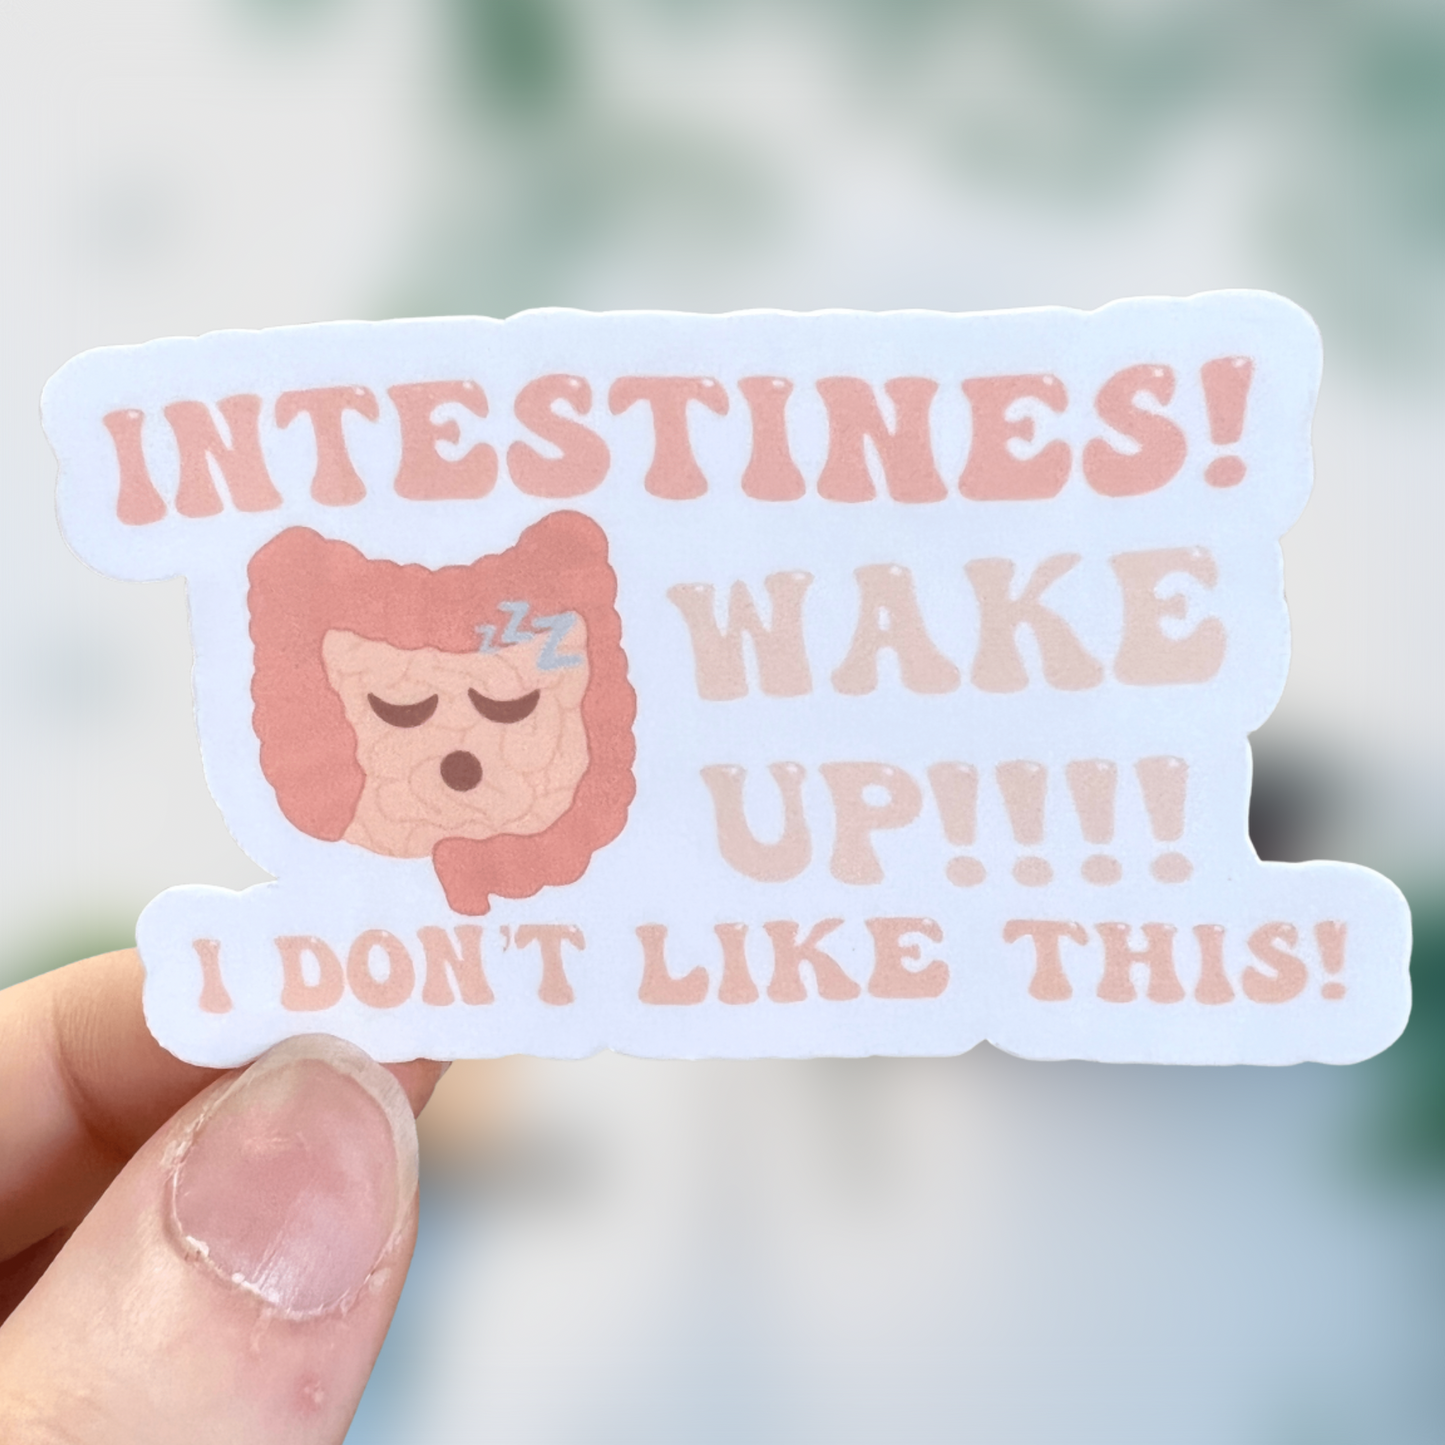 Stomach/Intestines/Colon Wake Up, I Don’t Like This Sticker